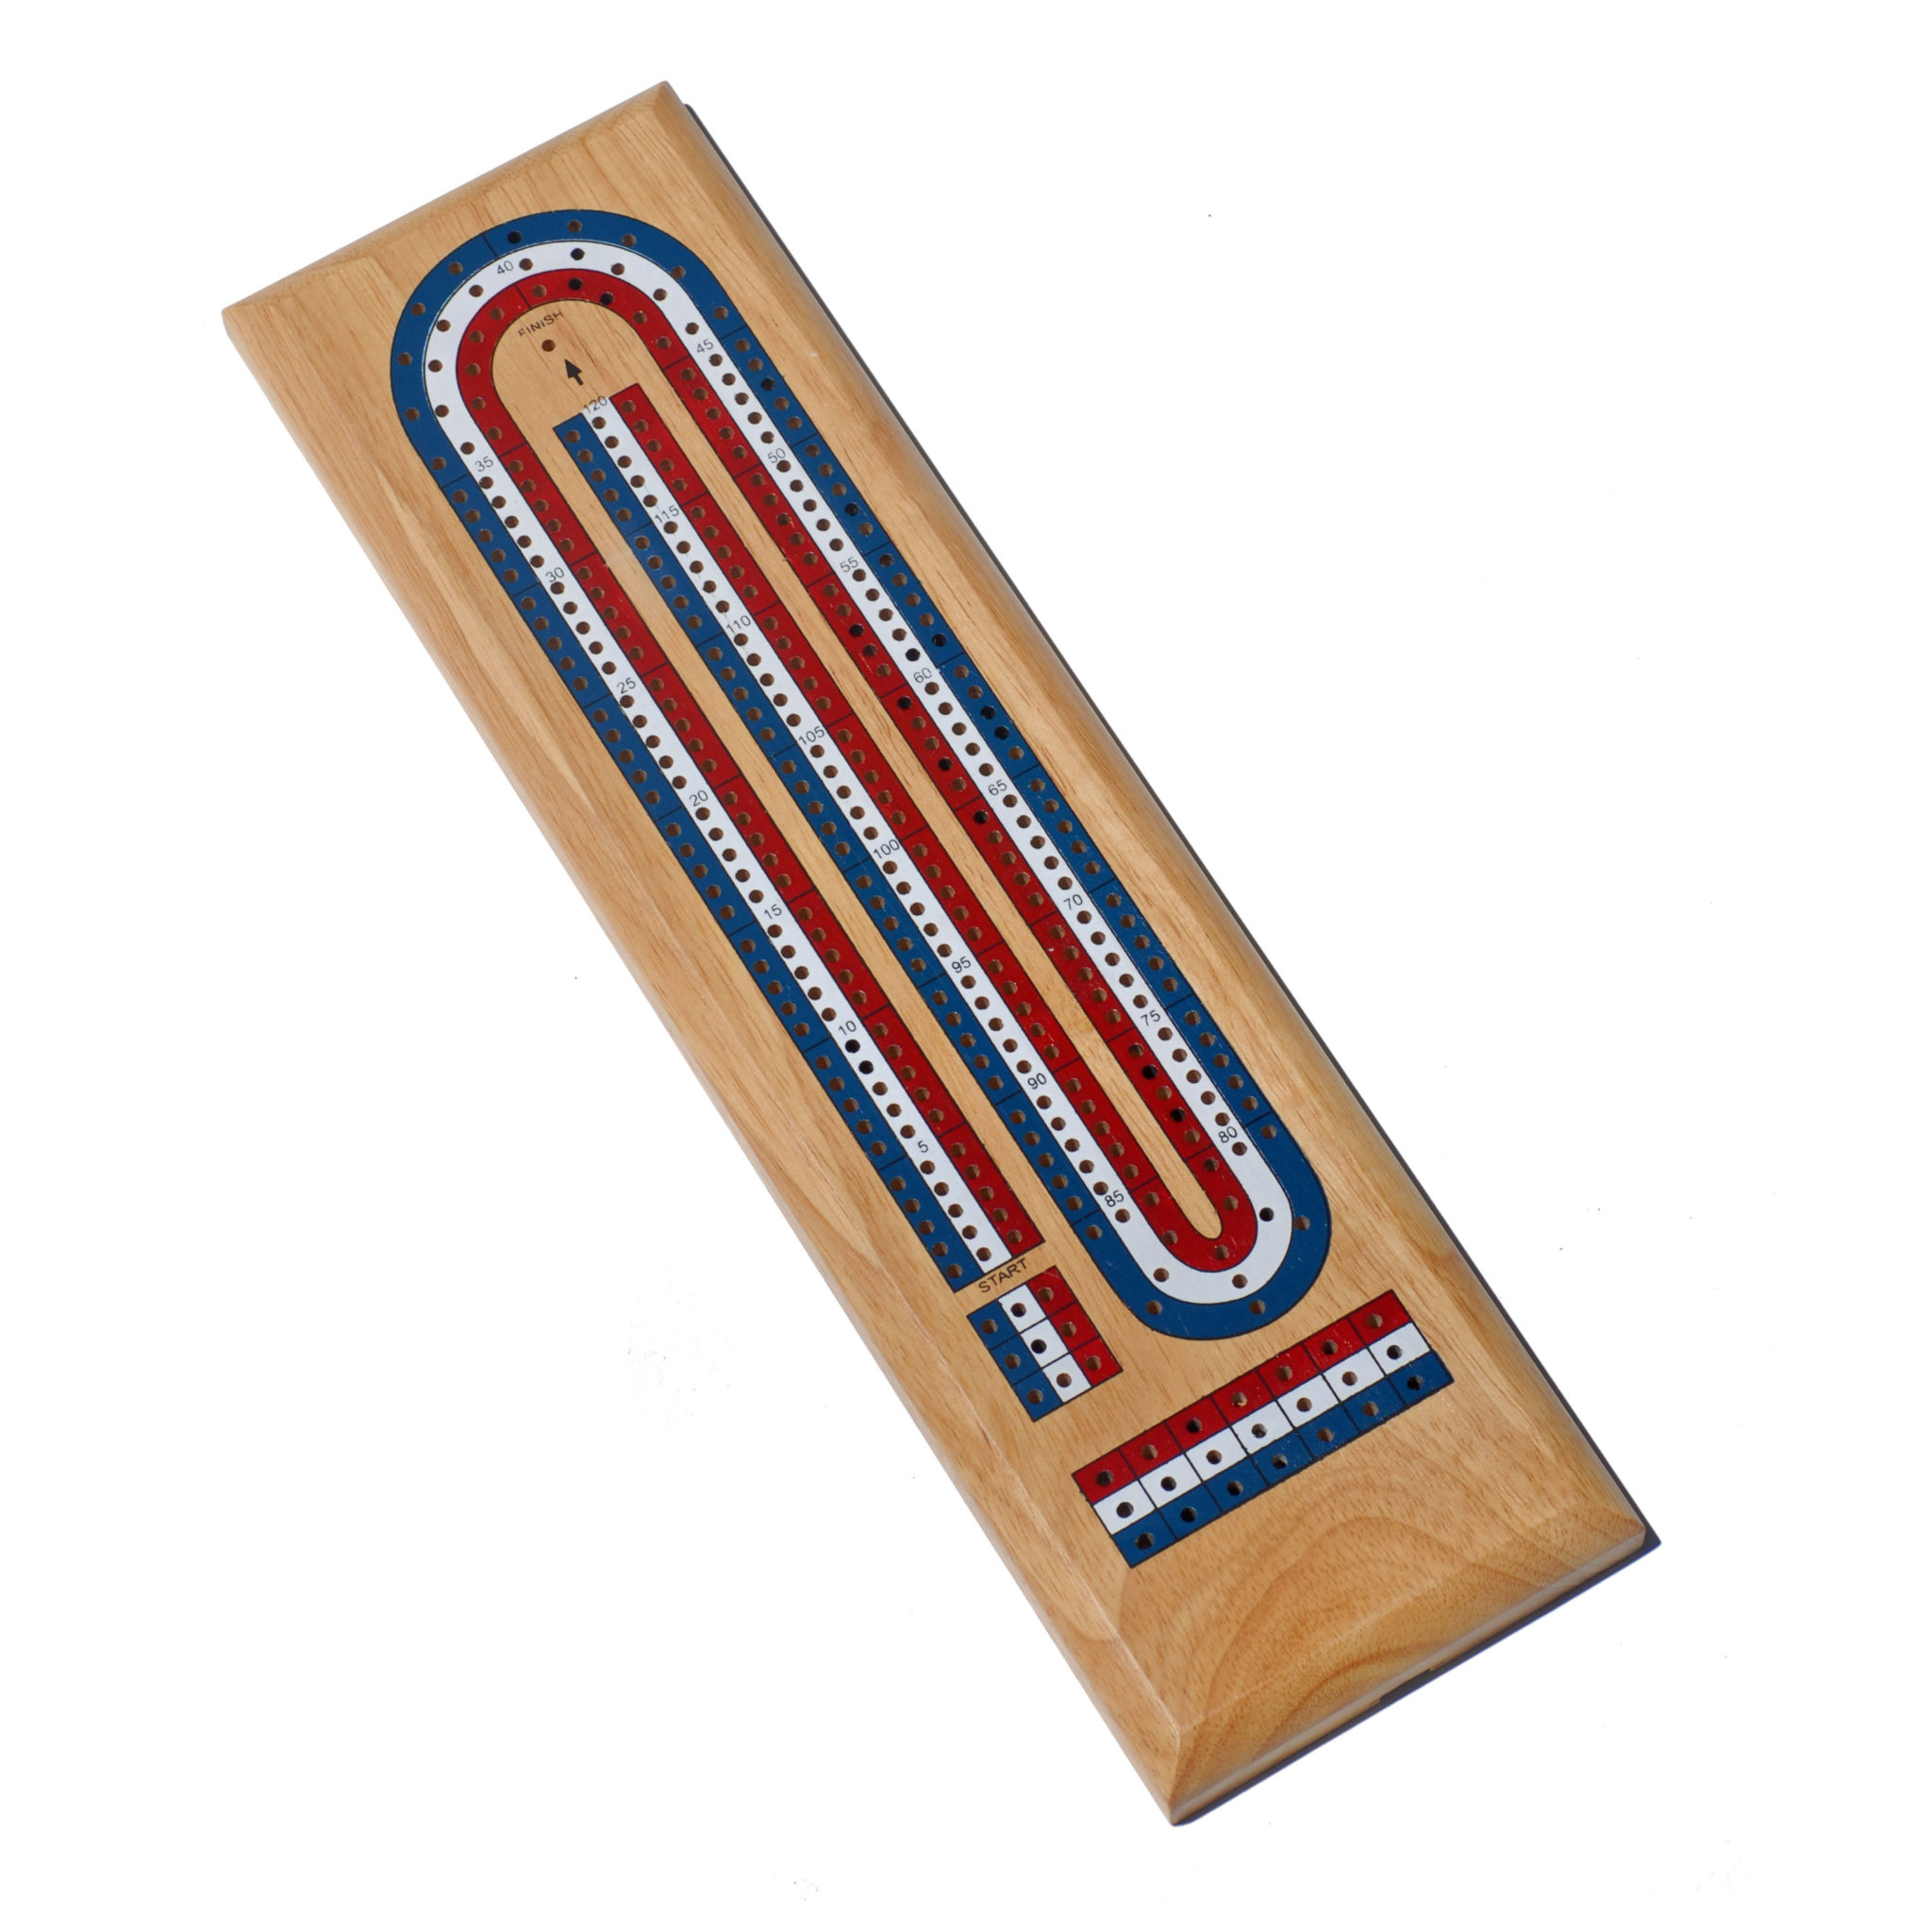 12 Plastic Cribbage Pegs To Keep Score 4 ea Red,White,Blue Bicycle Playing Cards 